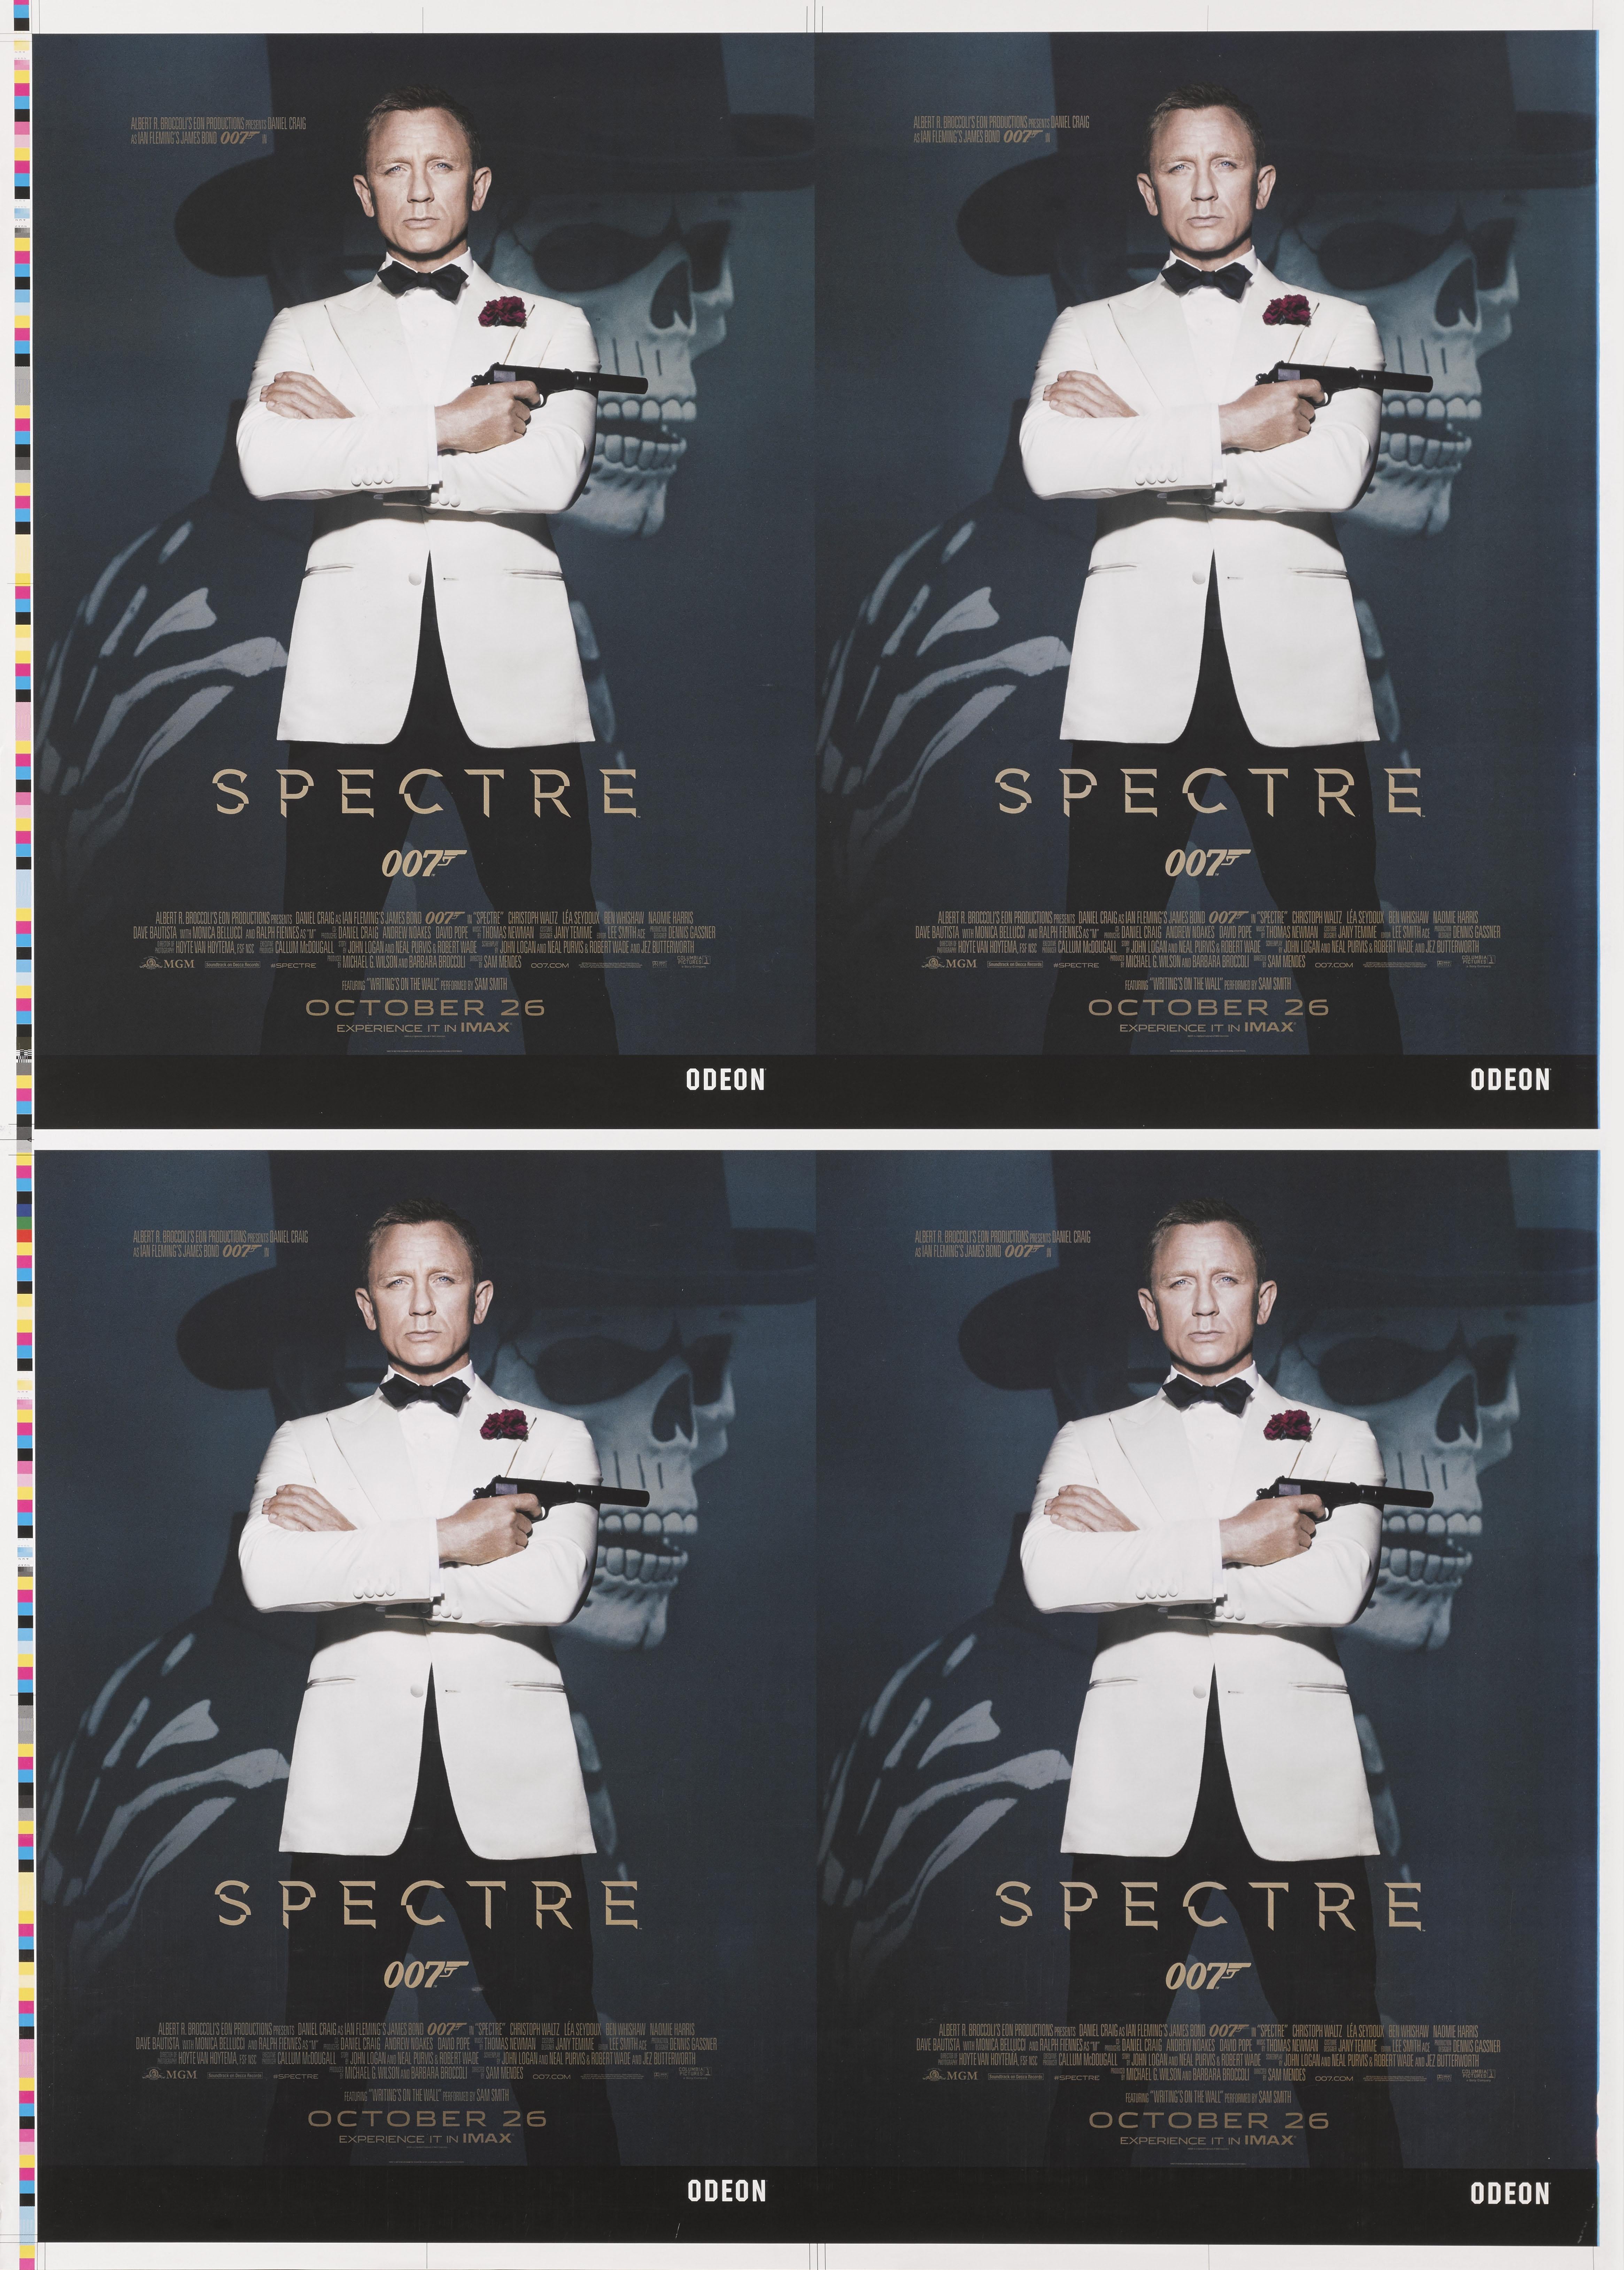 Original printer's proof for the British film poster.
Spectre was directed by Sam Mendes and starred Daniel Craig, Christoph Waltz
This was the 4th Daniel Craig played James Bond 007.
The poster is unfolded and would be shipped in a very strong